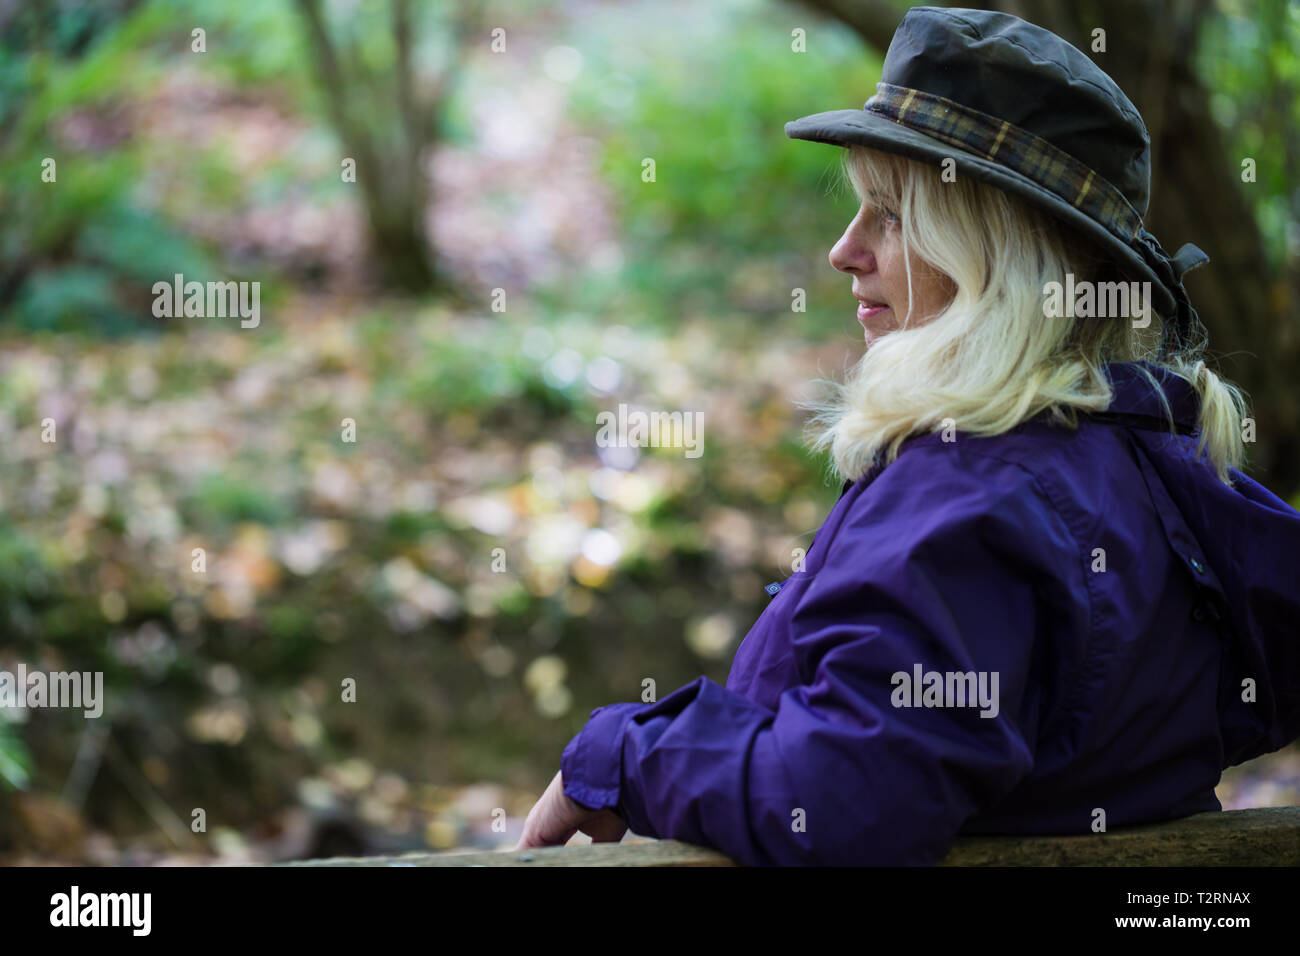 Shorne, Country Park, Kent. UK. A middle aged woman enjoys a rest on a bench while on a countryside walk. Stock Photo